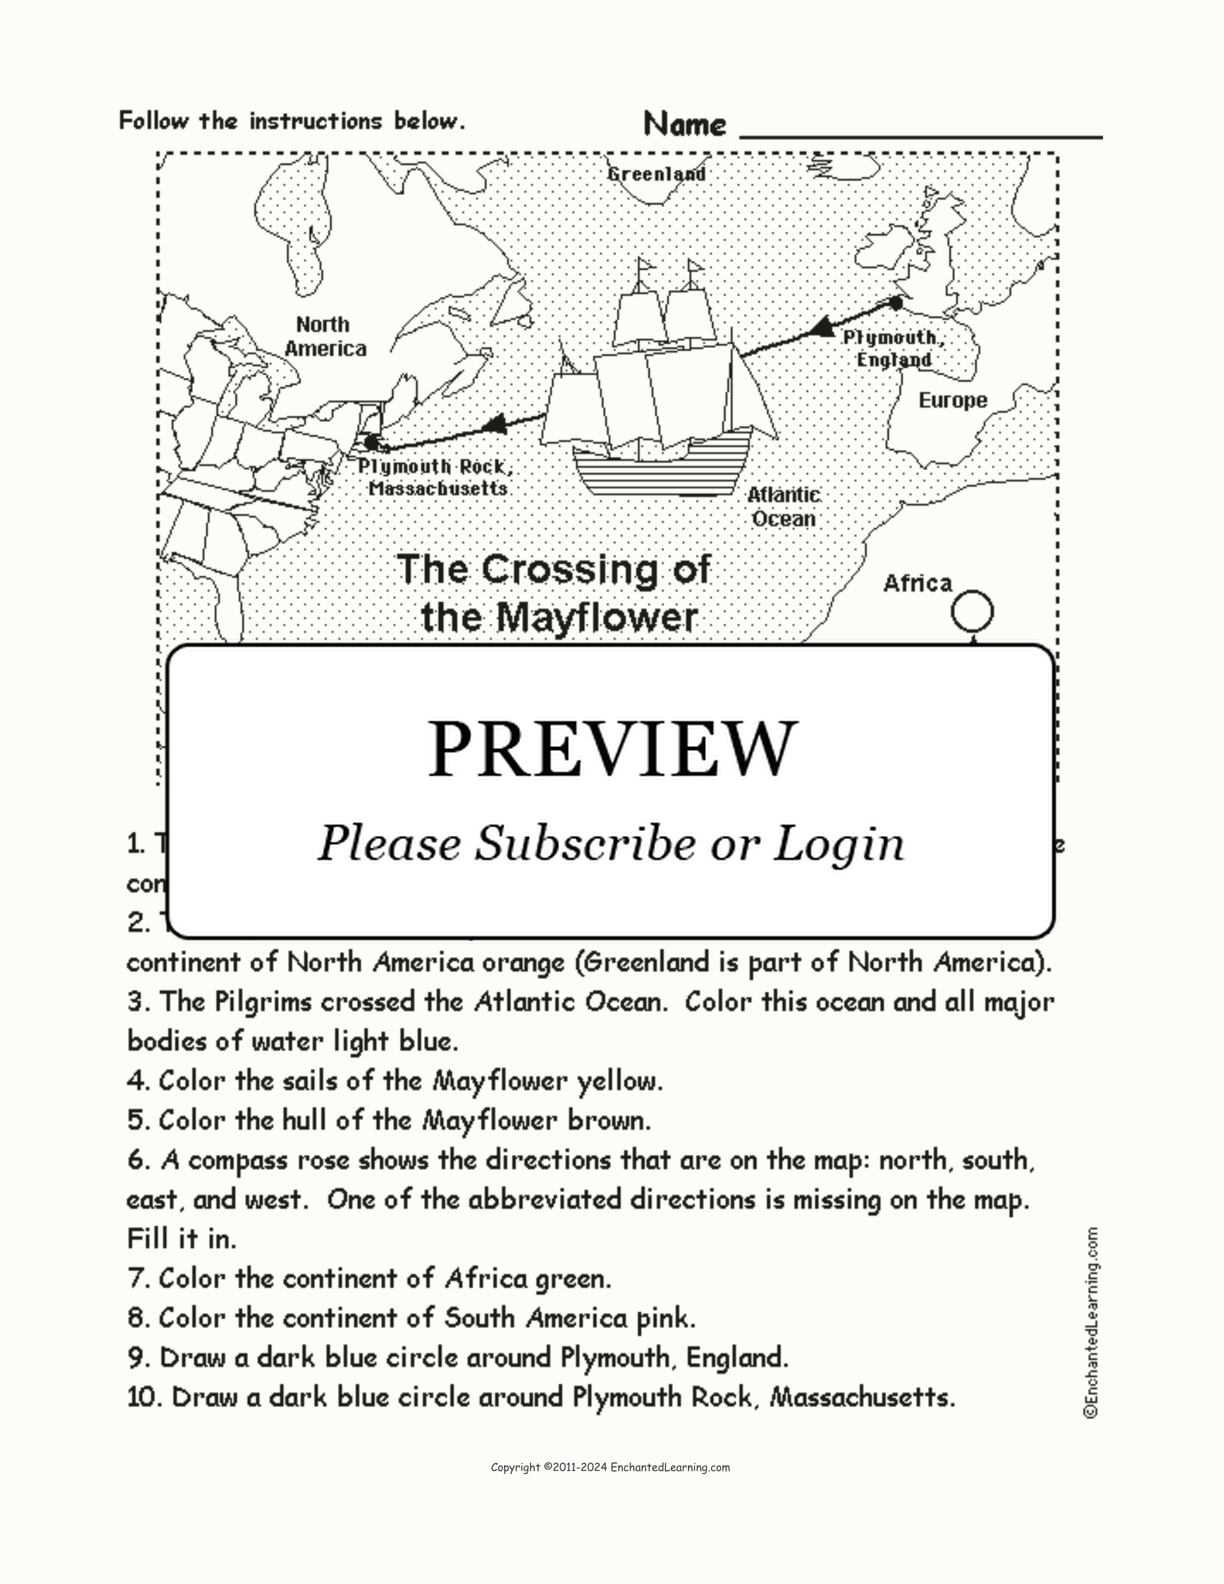 Crossing of the Mayflower - Follow the Instructions interactive worksheet page 1